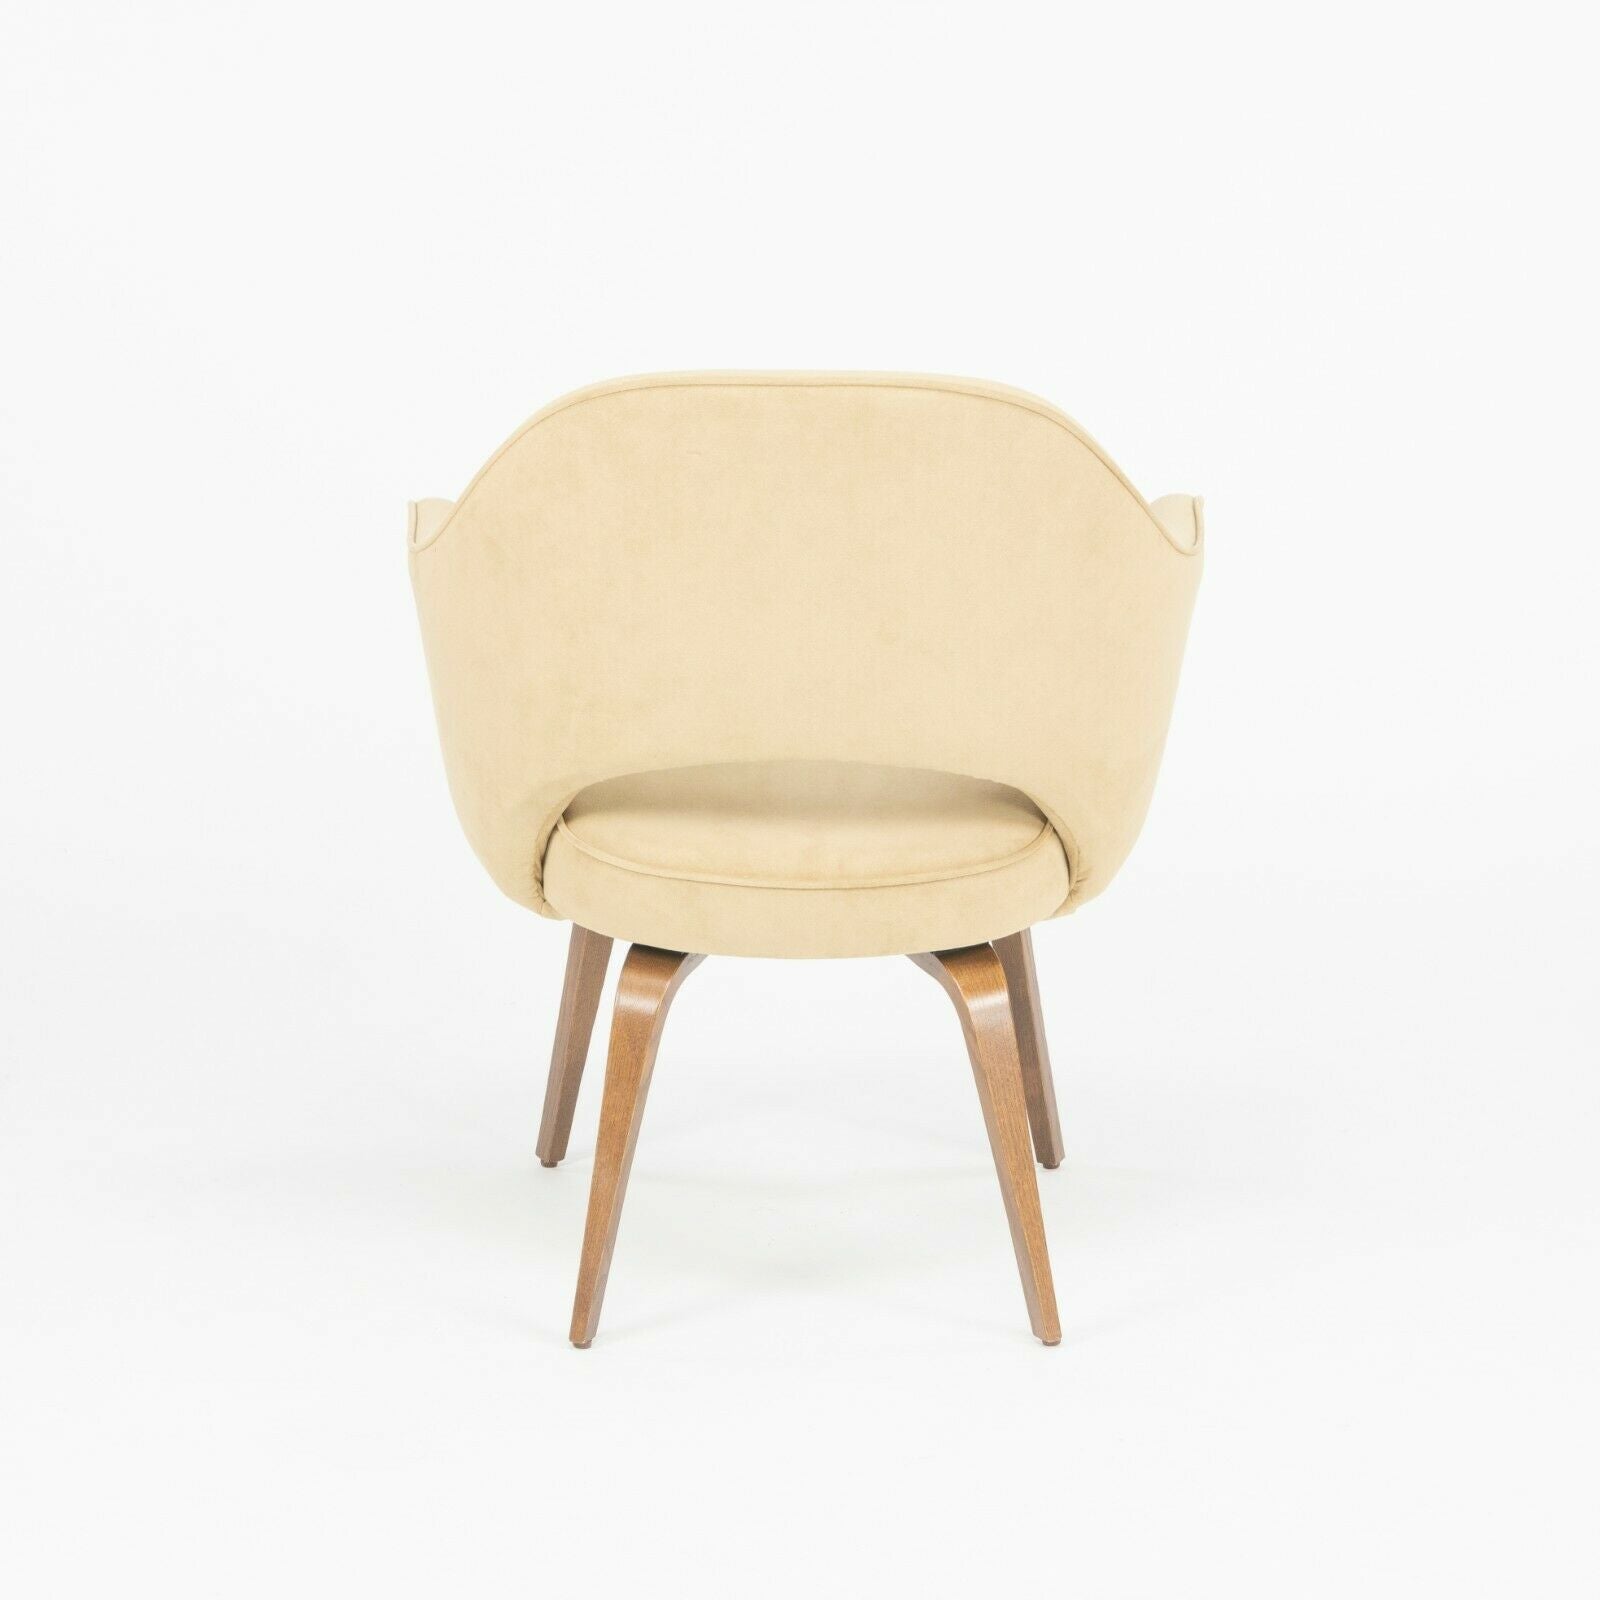 SOLD Eero Saarinen for Knoll 2020 Executive Arm Chair with Tan Suede & Wood Legs